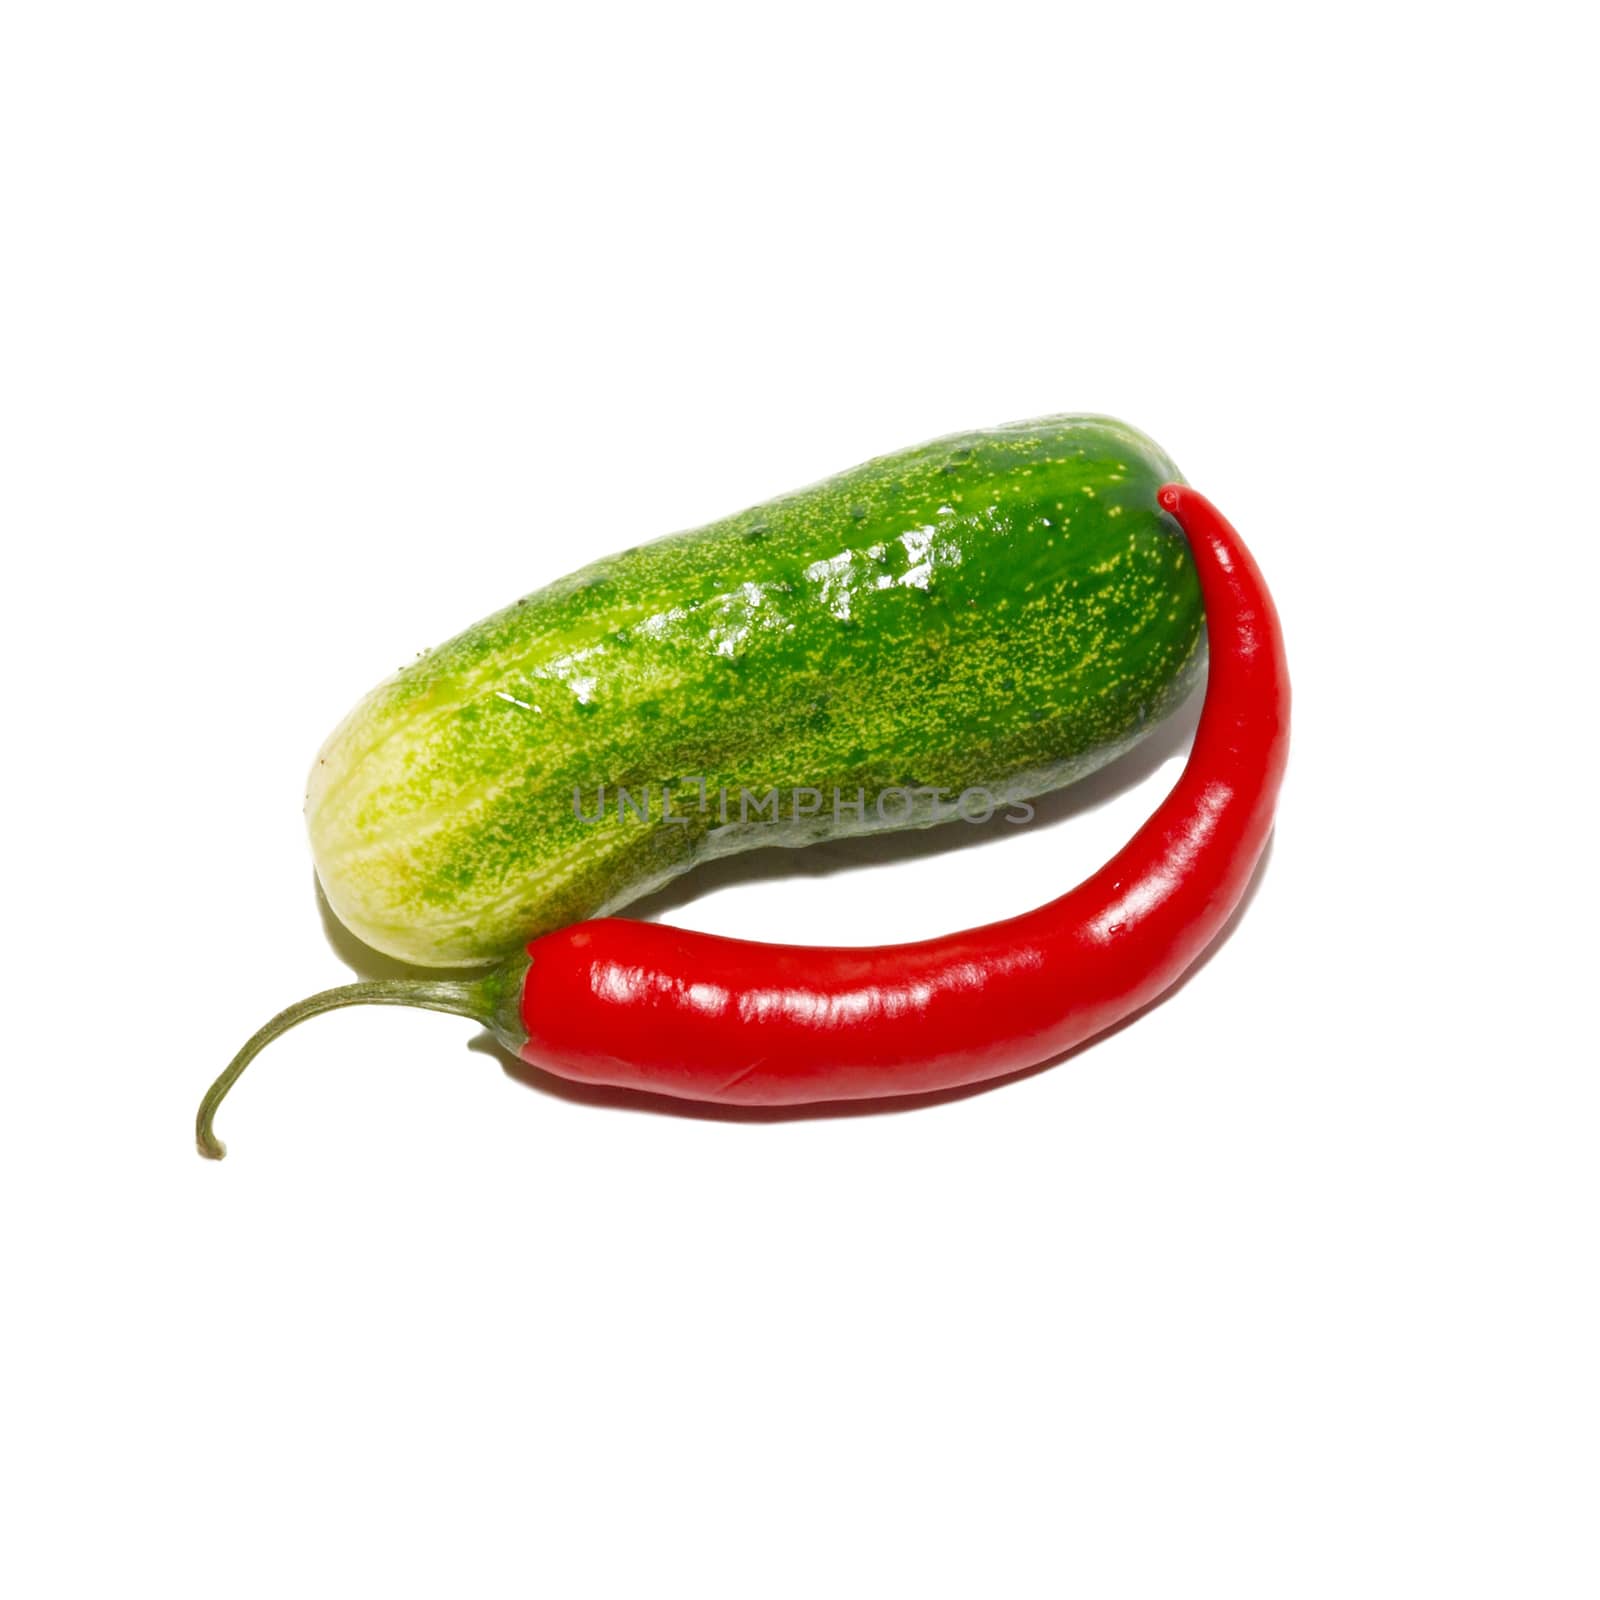 Cucumber and red pepper isolated on white.